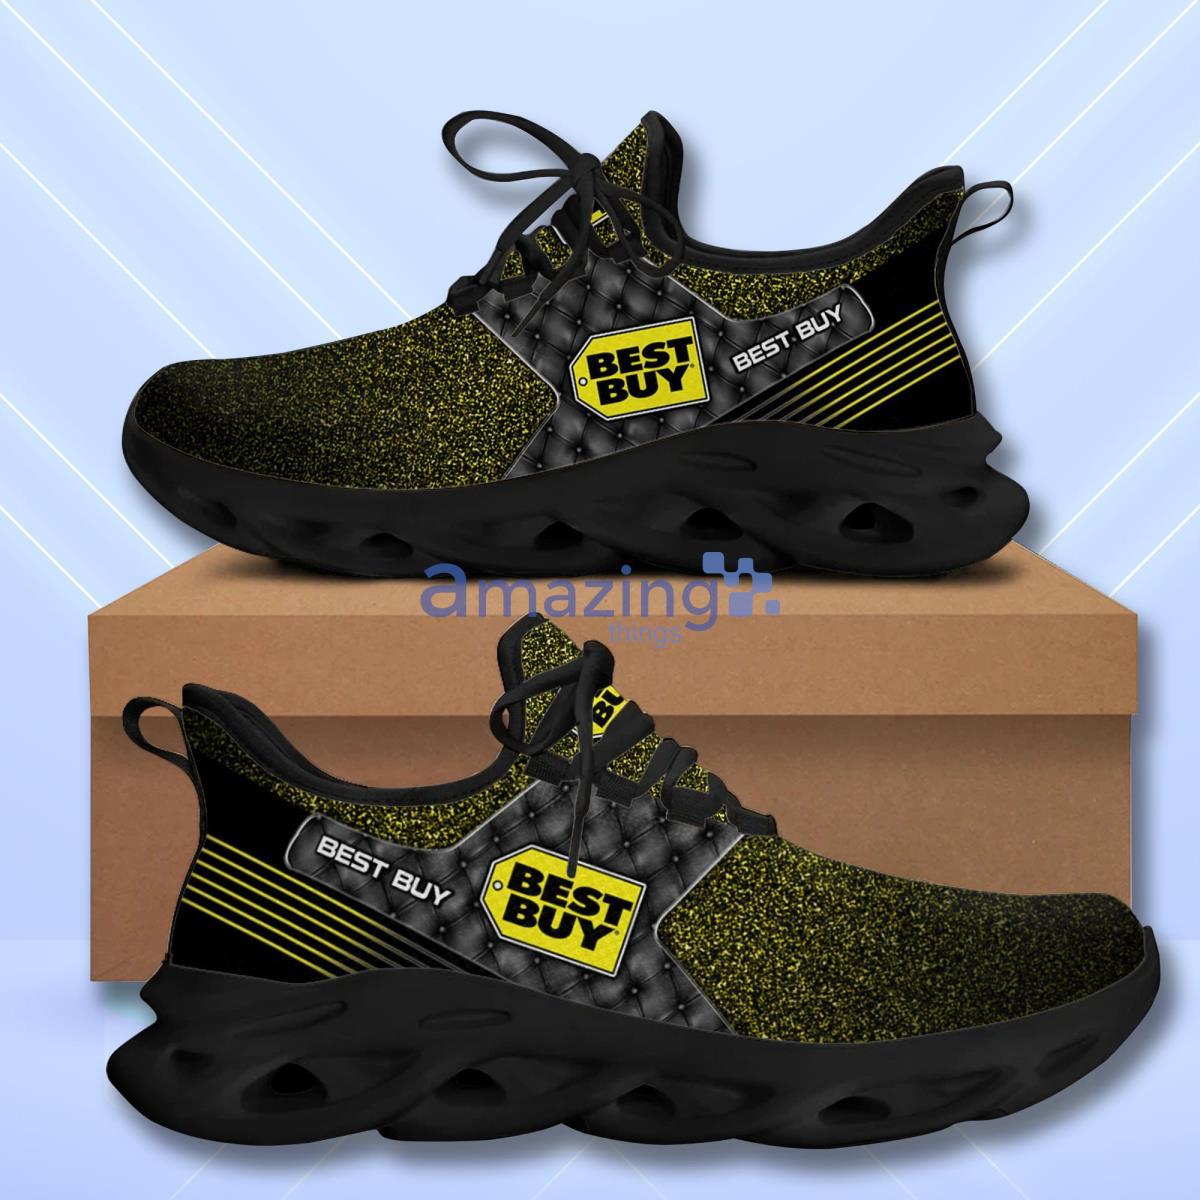 Best Buy Max Soul Shoes Hot Trending Gift For Men Women Product Photo 1